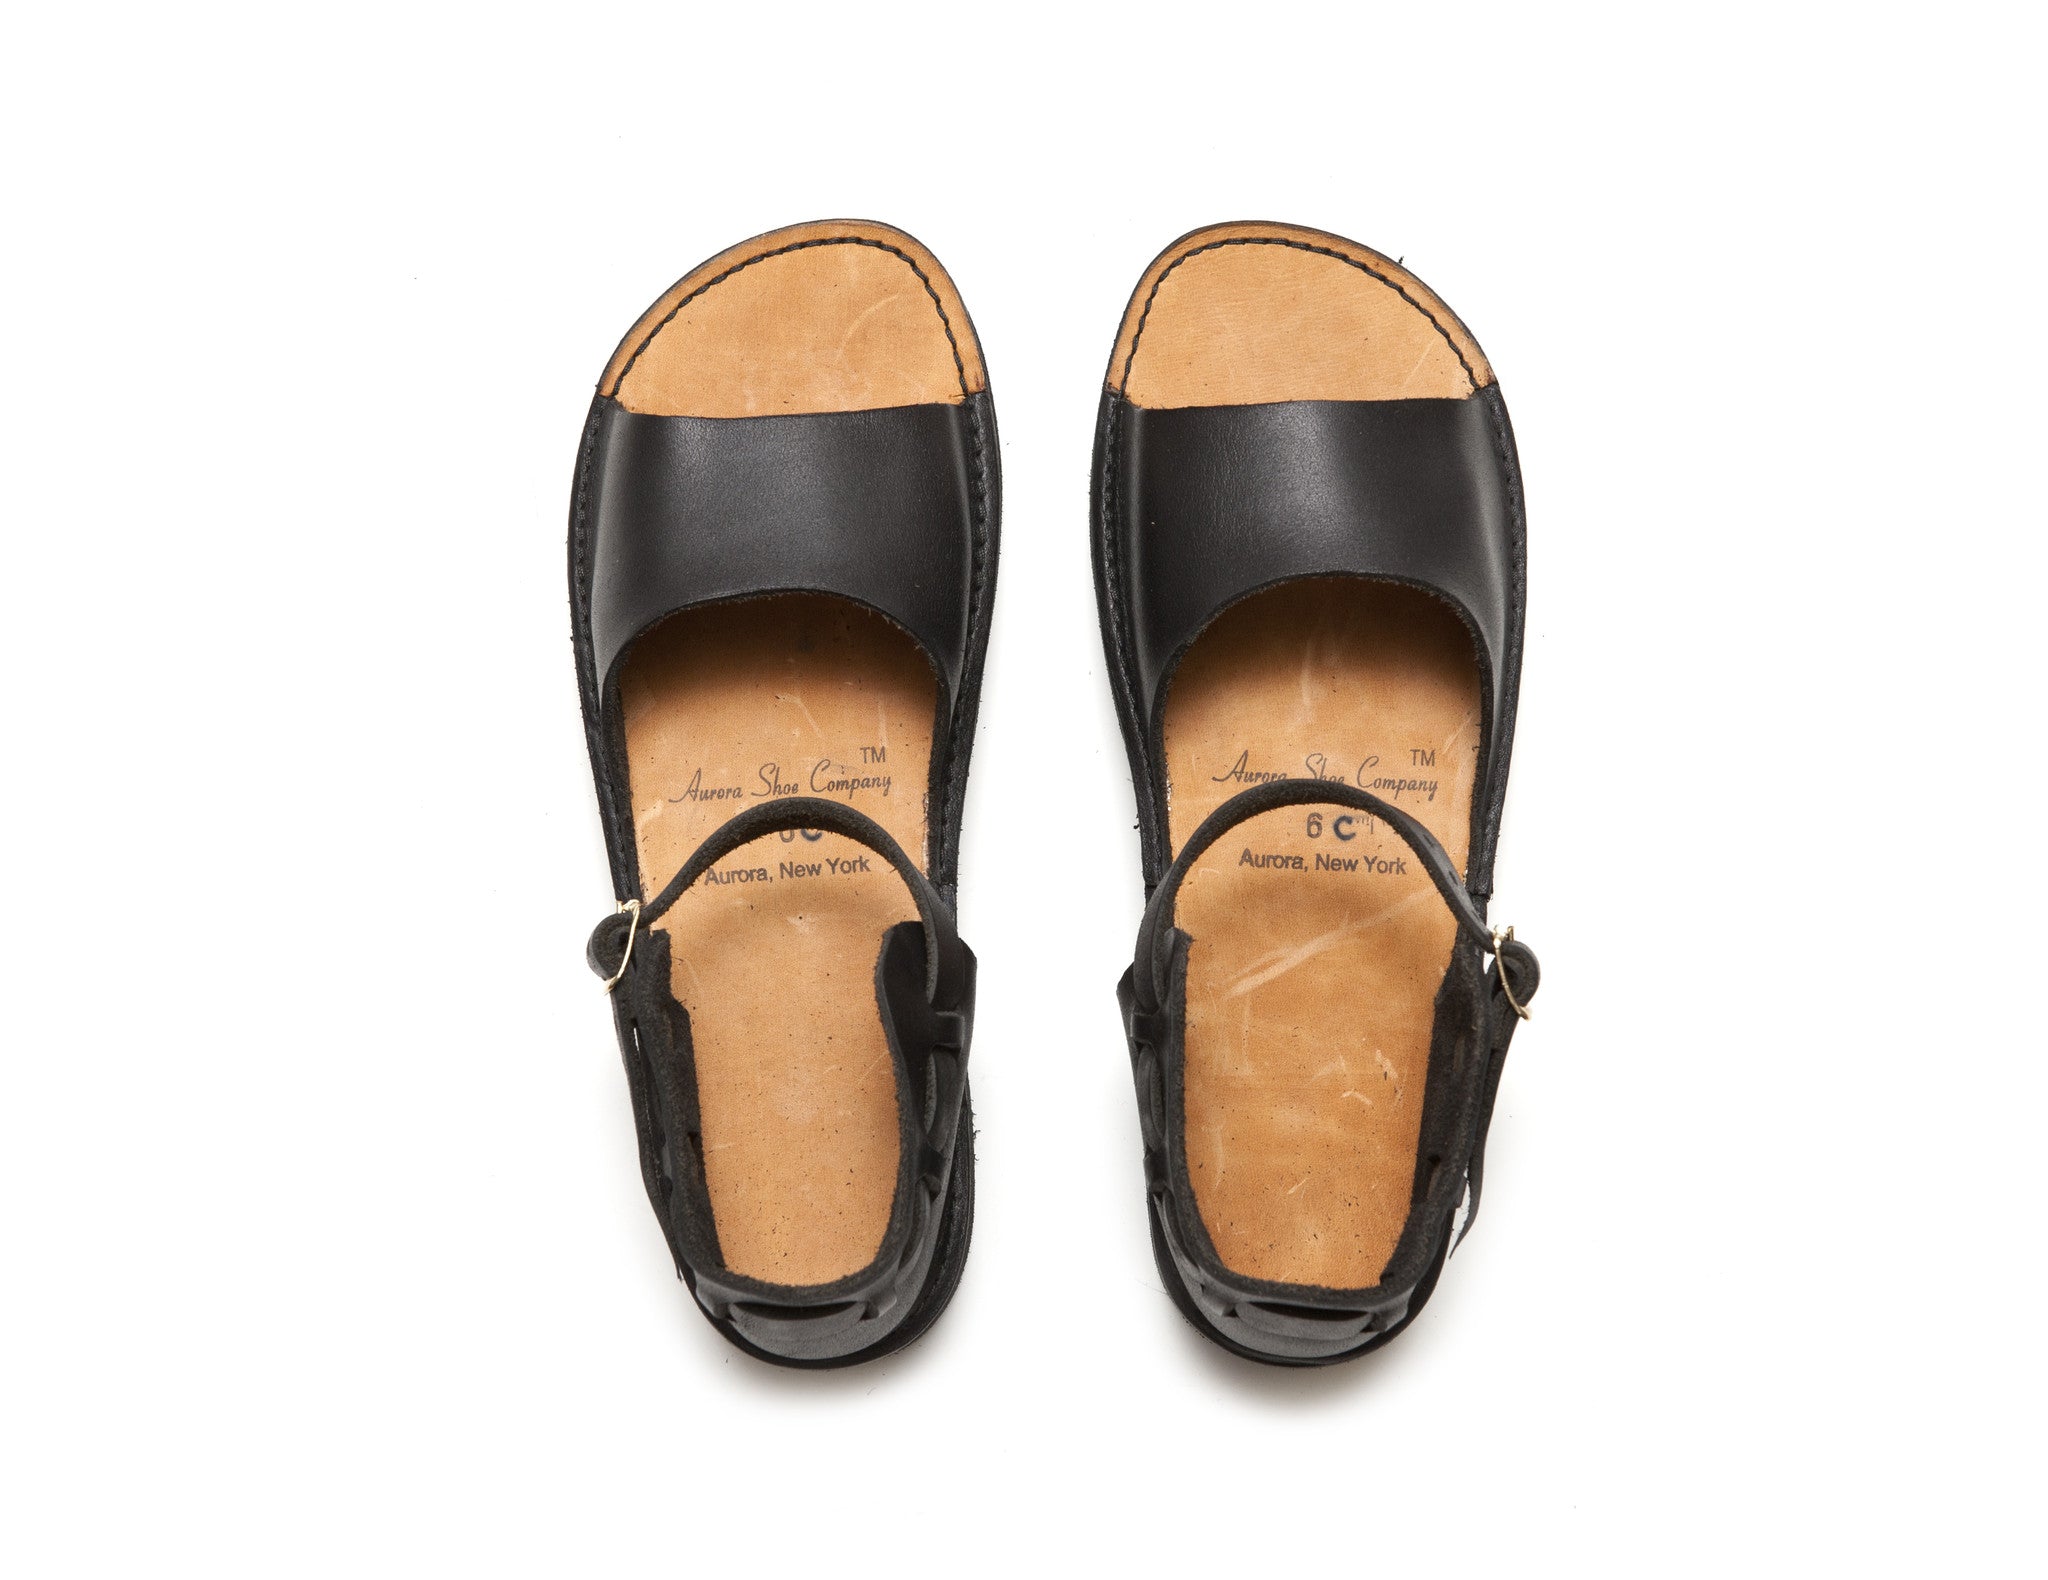 Black New Mexican Handmade Leather sandals by Aurora Shoe Co. - Top down, white background.